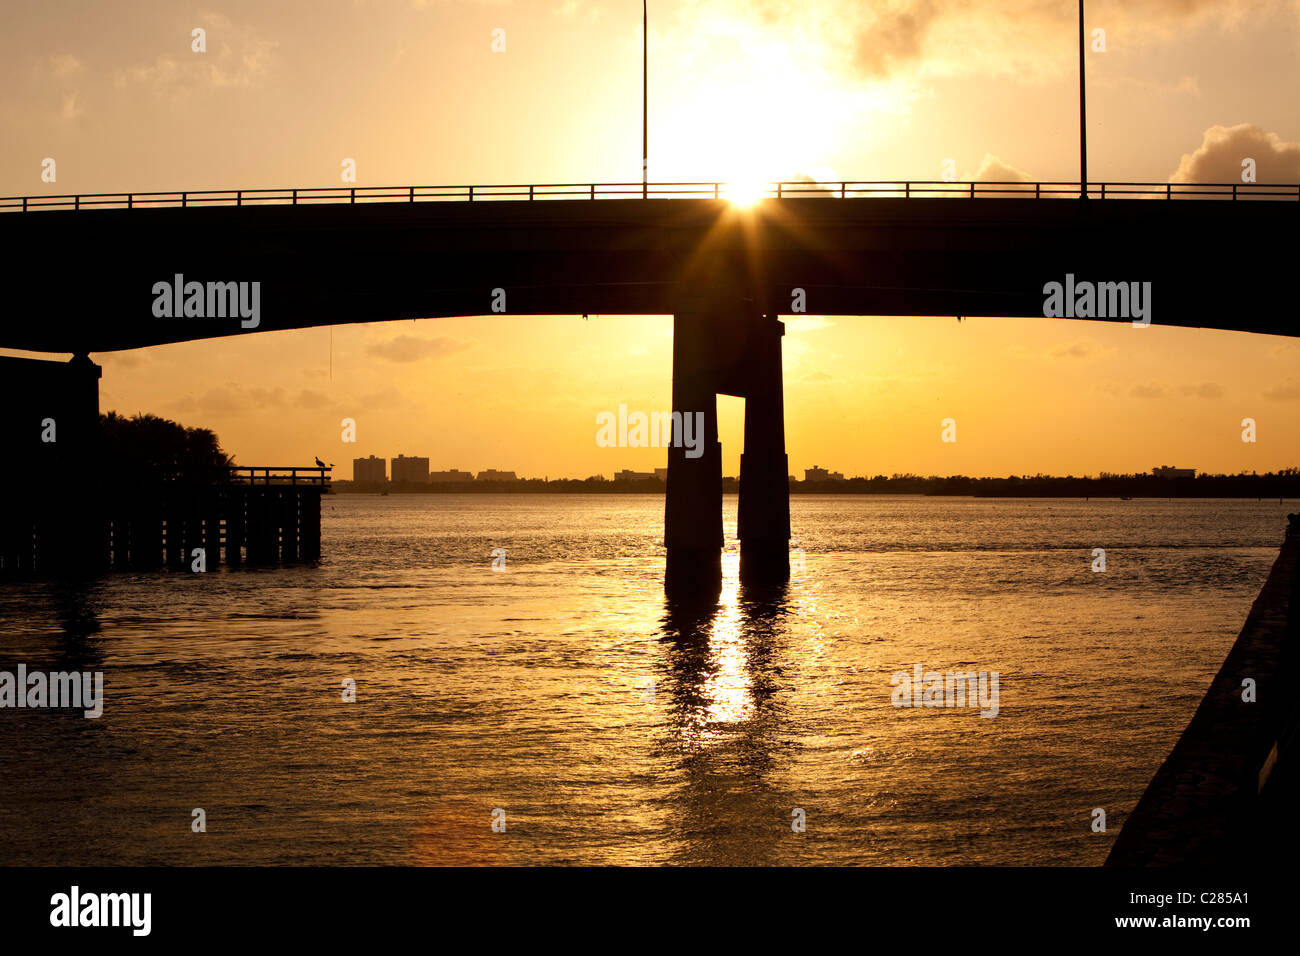 Silhouette of the Collins Avenue flyover backlit at sunset, Haulover Park Bayside, North Miami, Florida, USA. Stock Photo